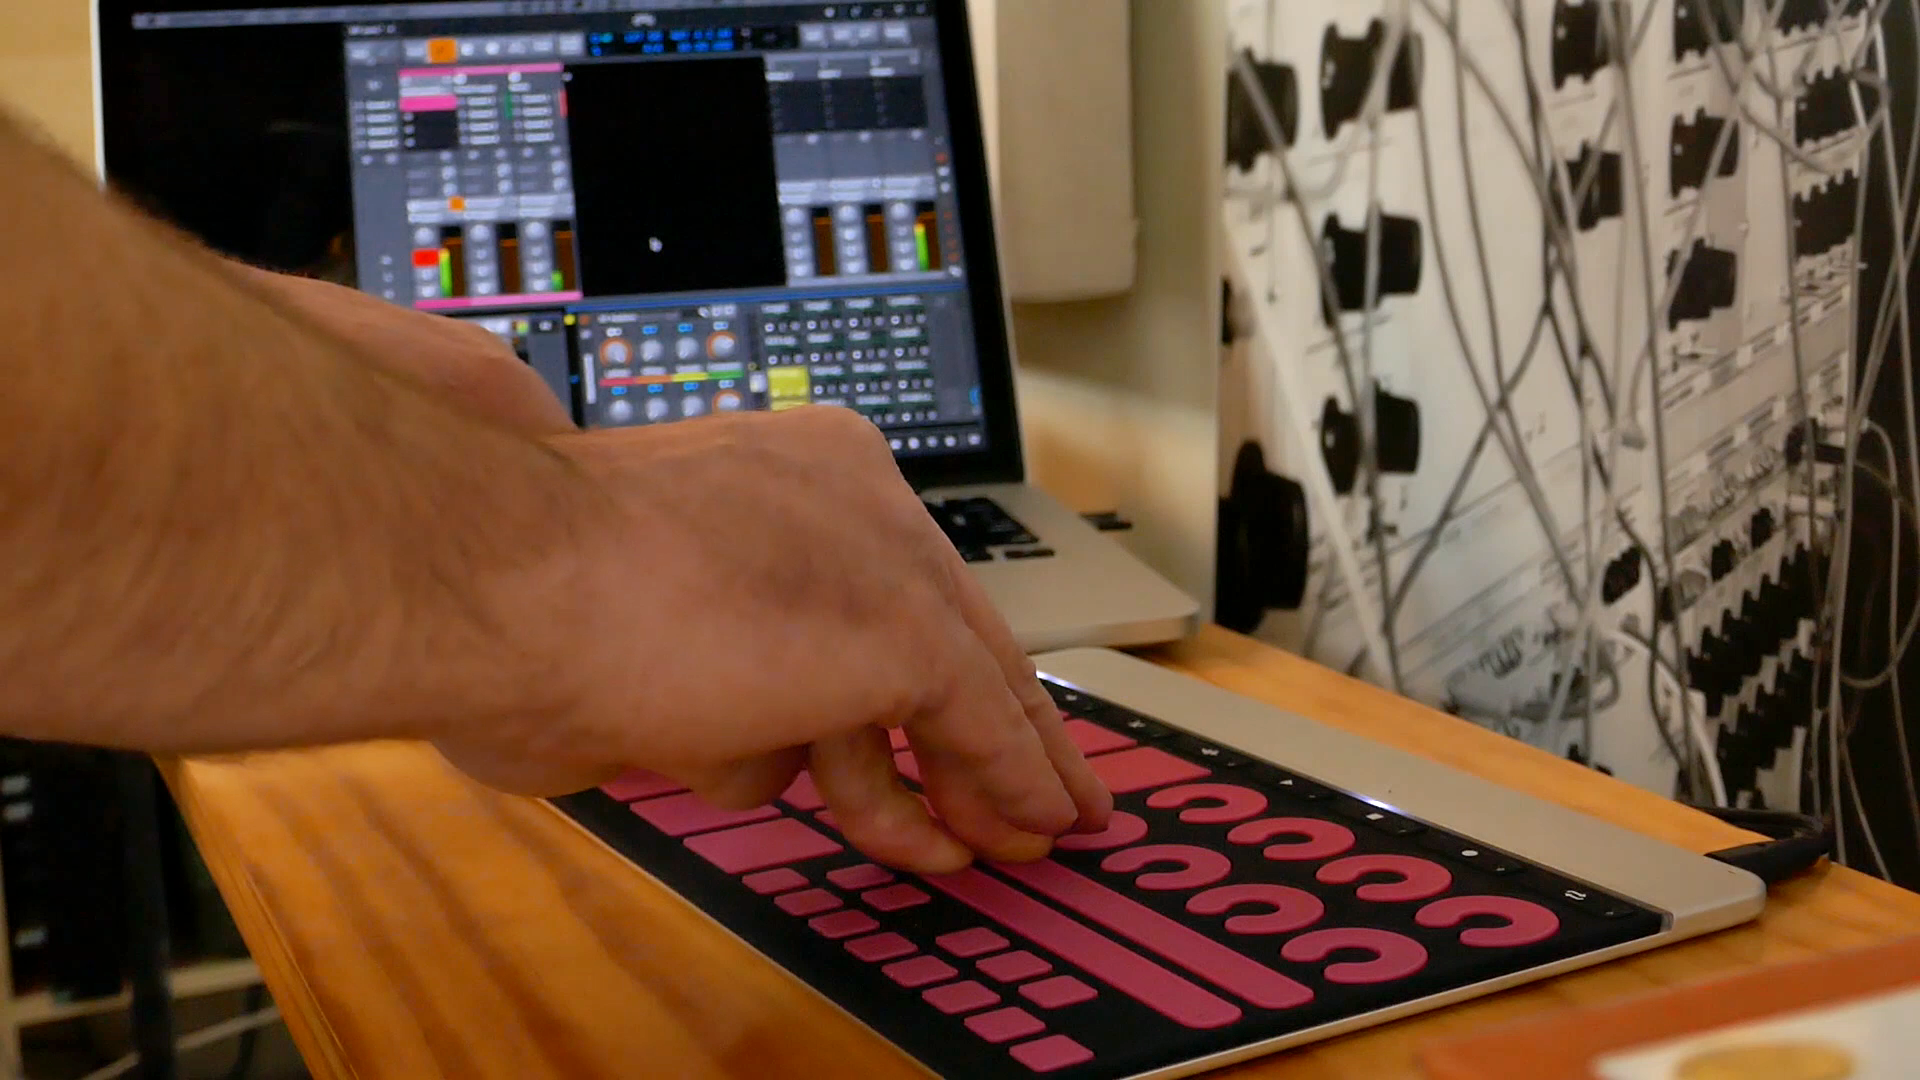 MP Jams! Crushing on the Music Producer Overlay.